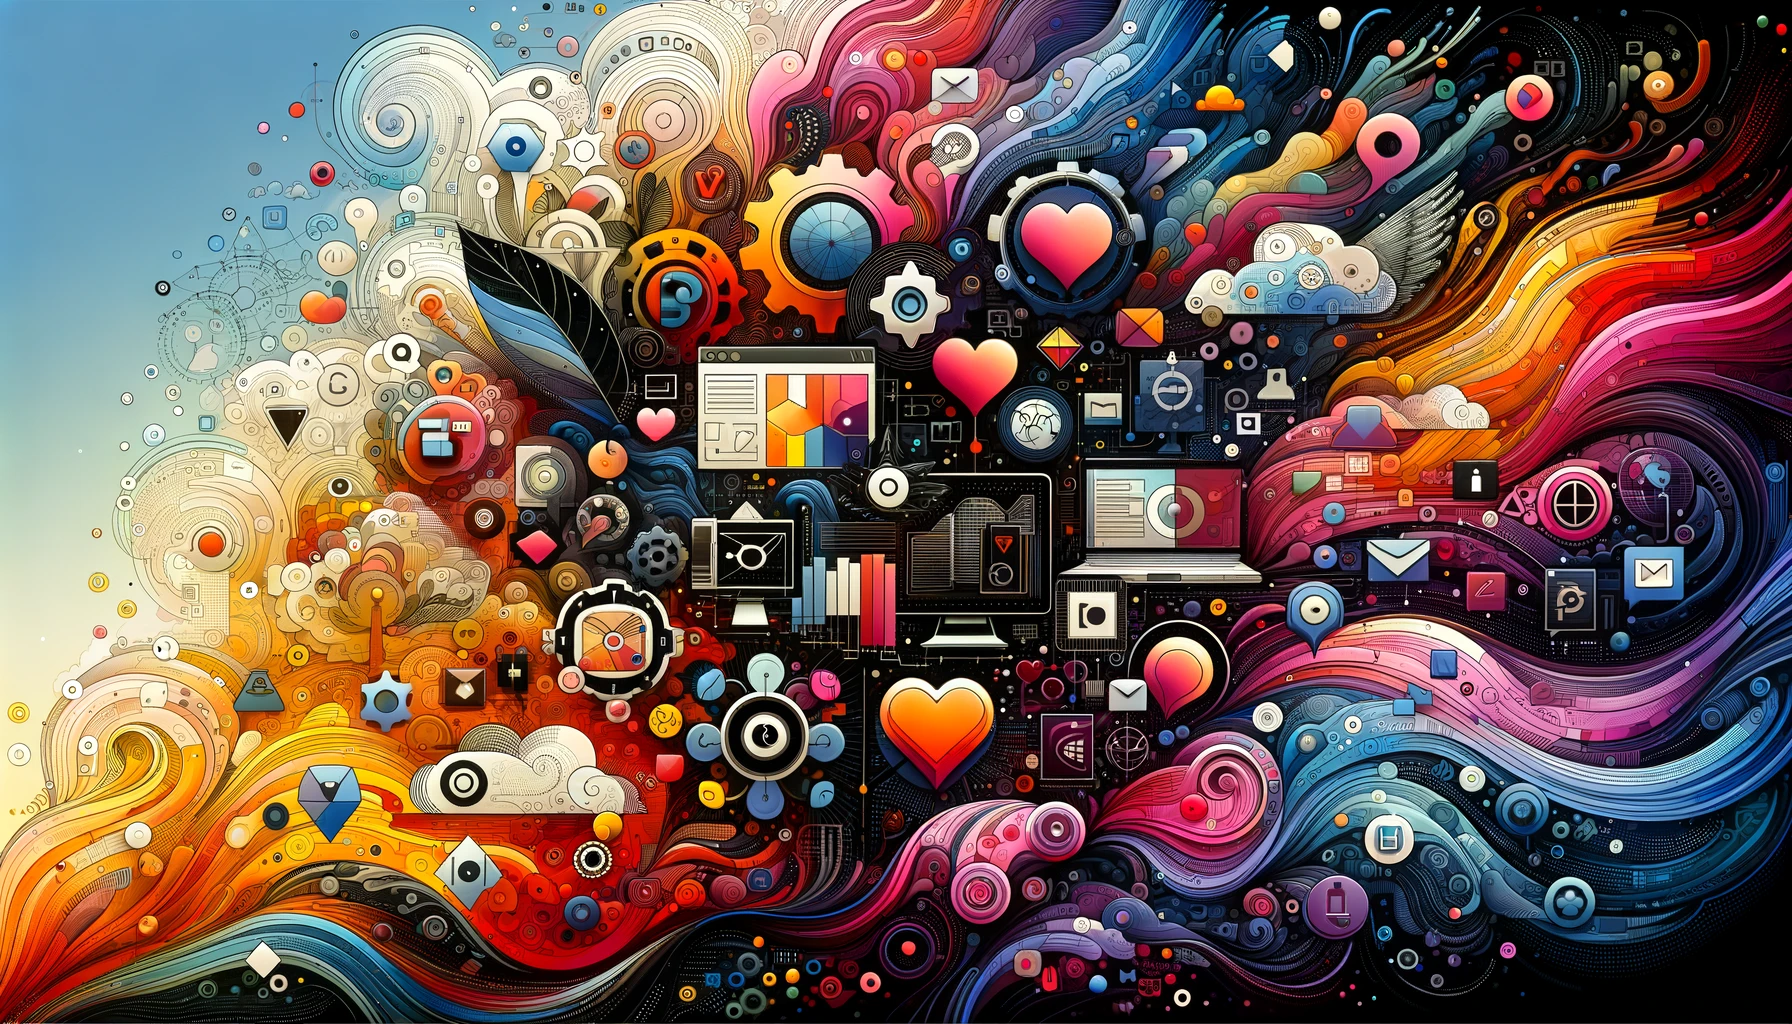 An abstract representation showcasing key elements of Effective Branding Strategies, including a unique and vibrant brand logo, diversity within a unified target audience, symbols of digital communication, consistency in visual elements, and abstract symbols of emotional connection.